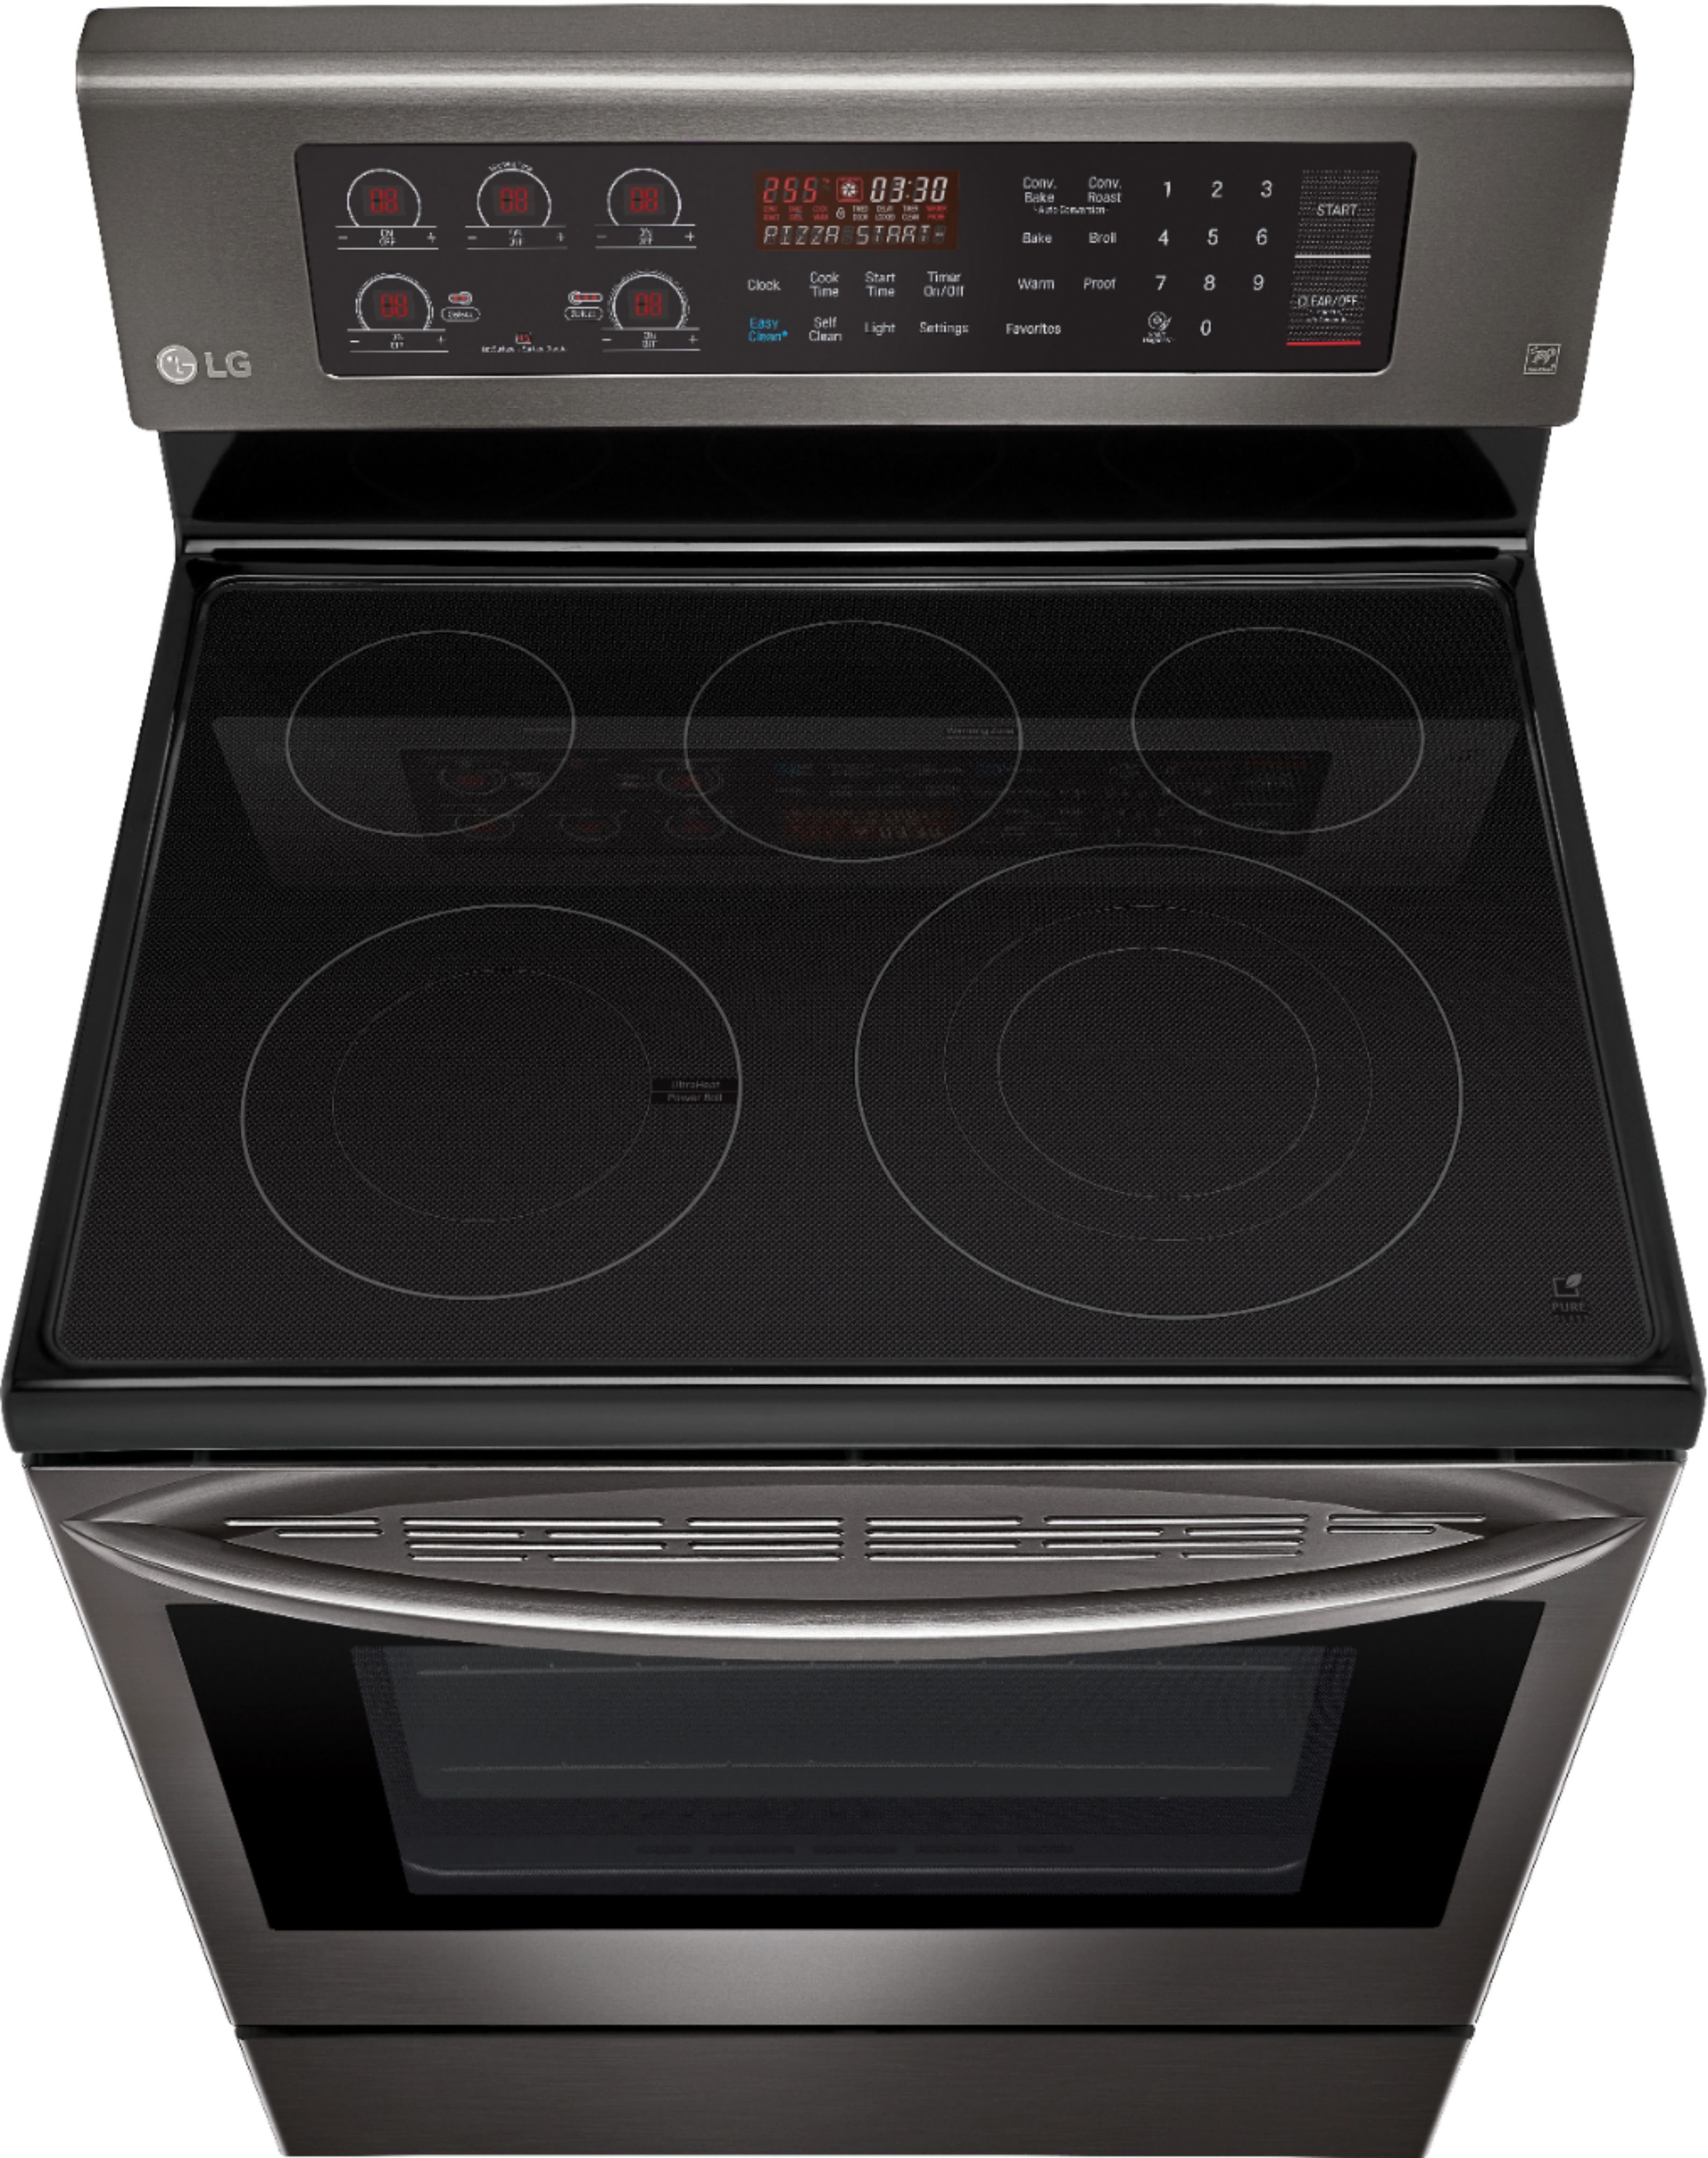 6.3 cu. ft. Electric Single Oven Range with EasyClean®